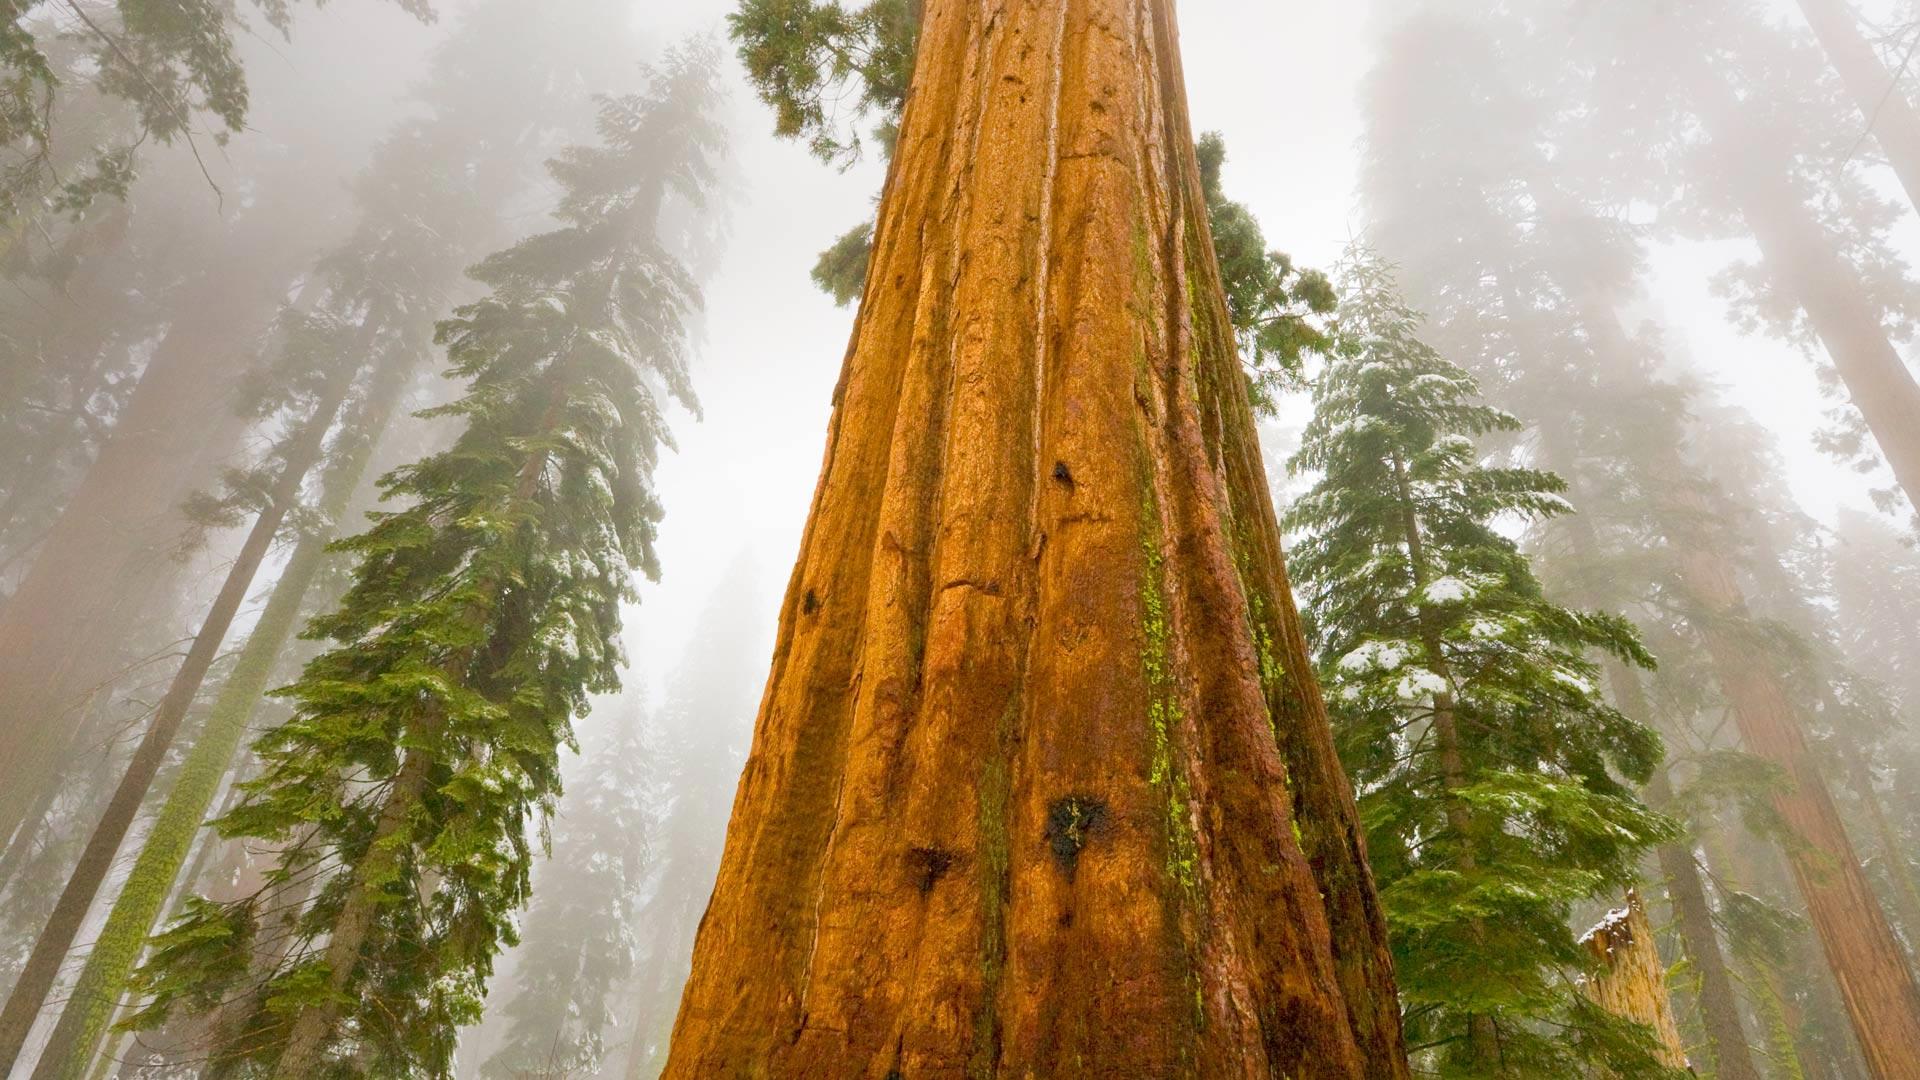 Sequoia National Park Wallpapers Top Free Sequoia National Park